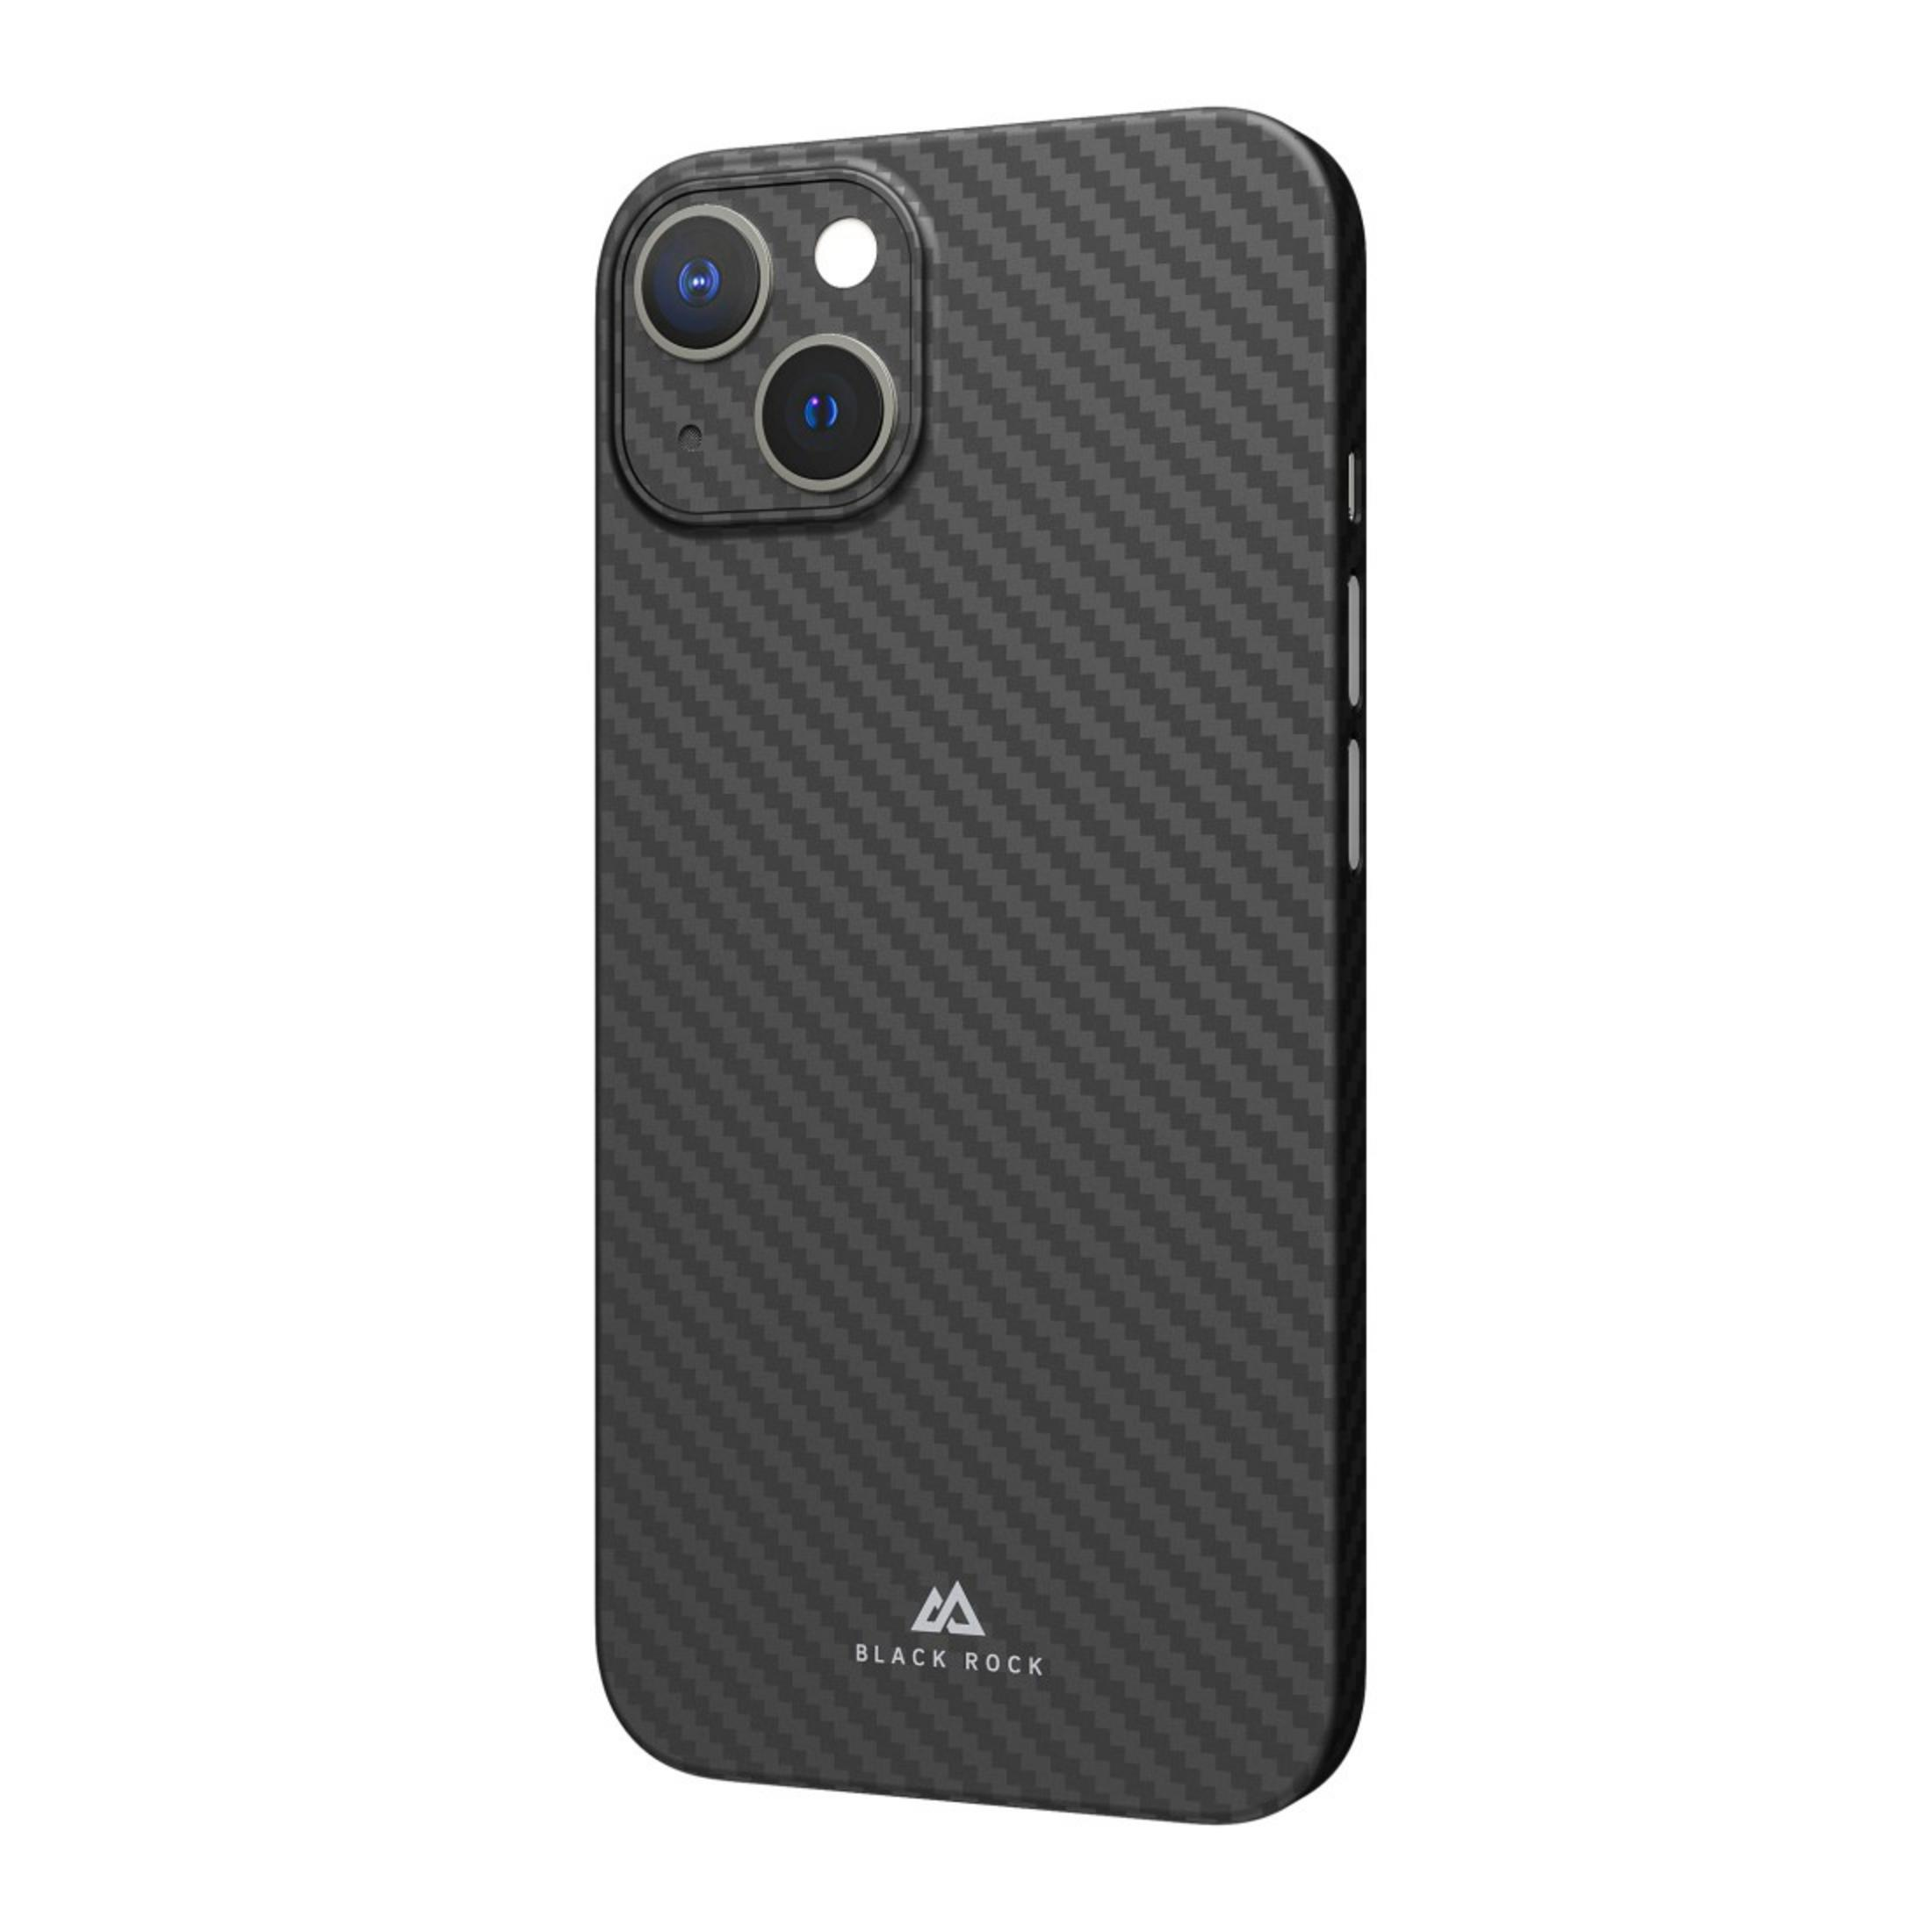 ROCK ICED 217020 IPH13 Backcover, BLACK iPhone THIN ULTRA 13, COVER Apple, SCHWARZ/CARBON, Schwarz